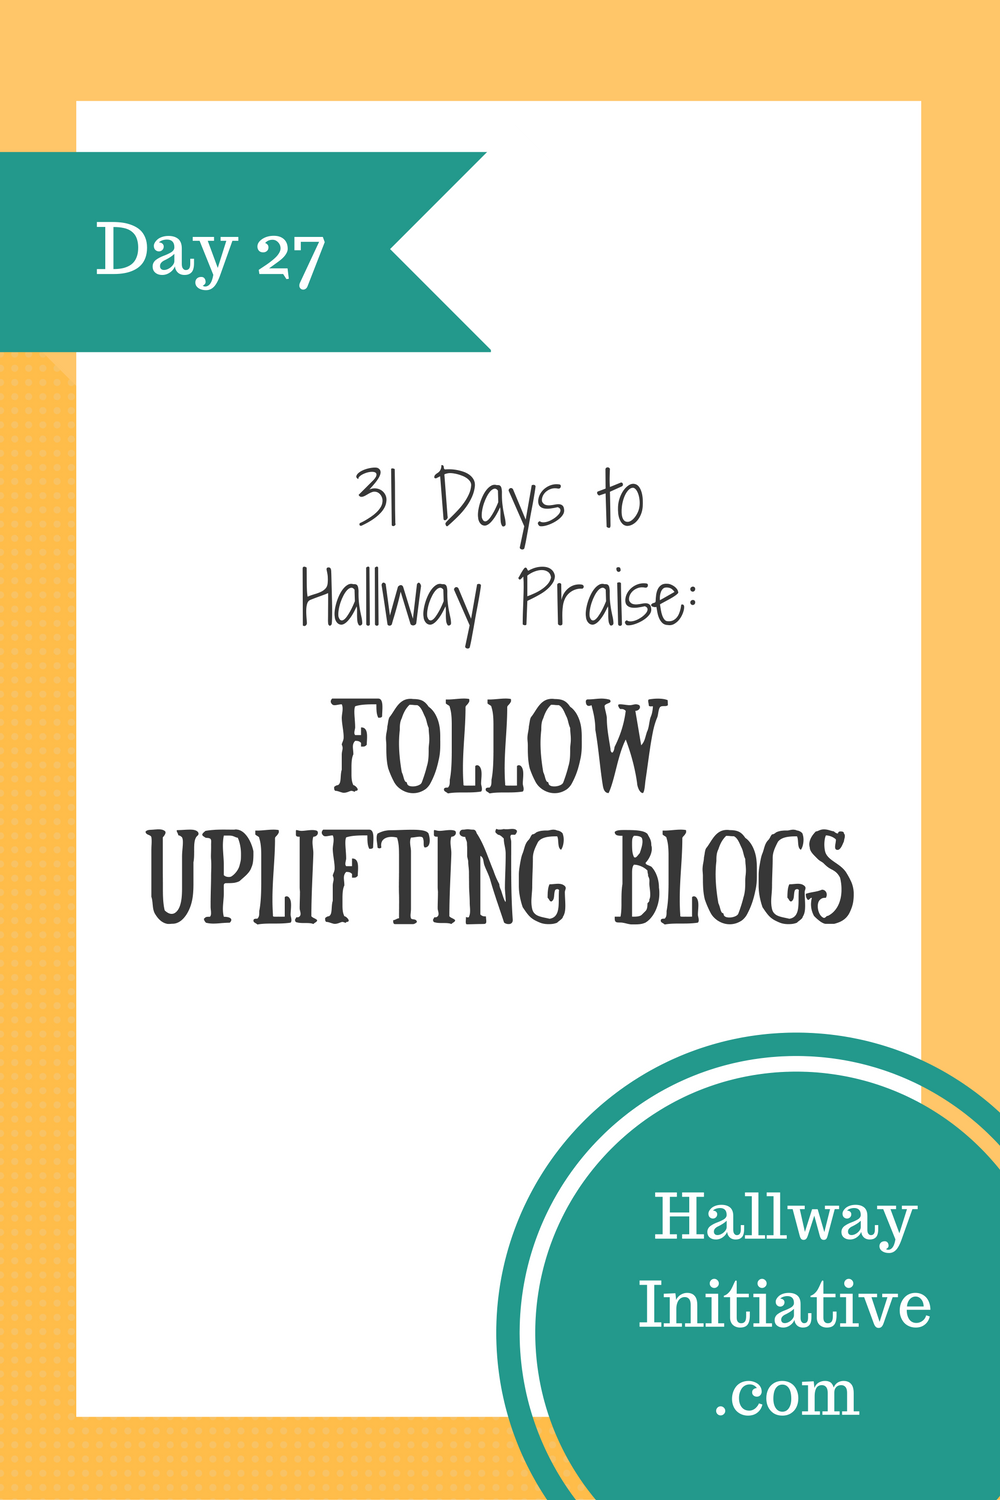 Day 27: read uplifting blogs